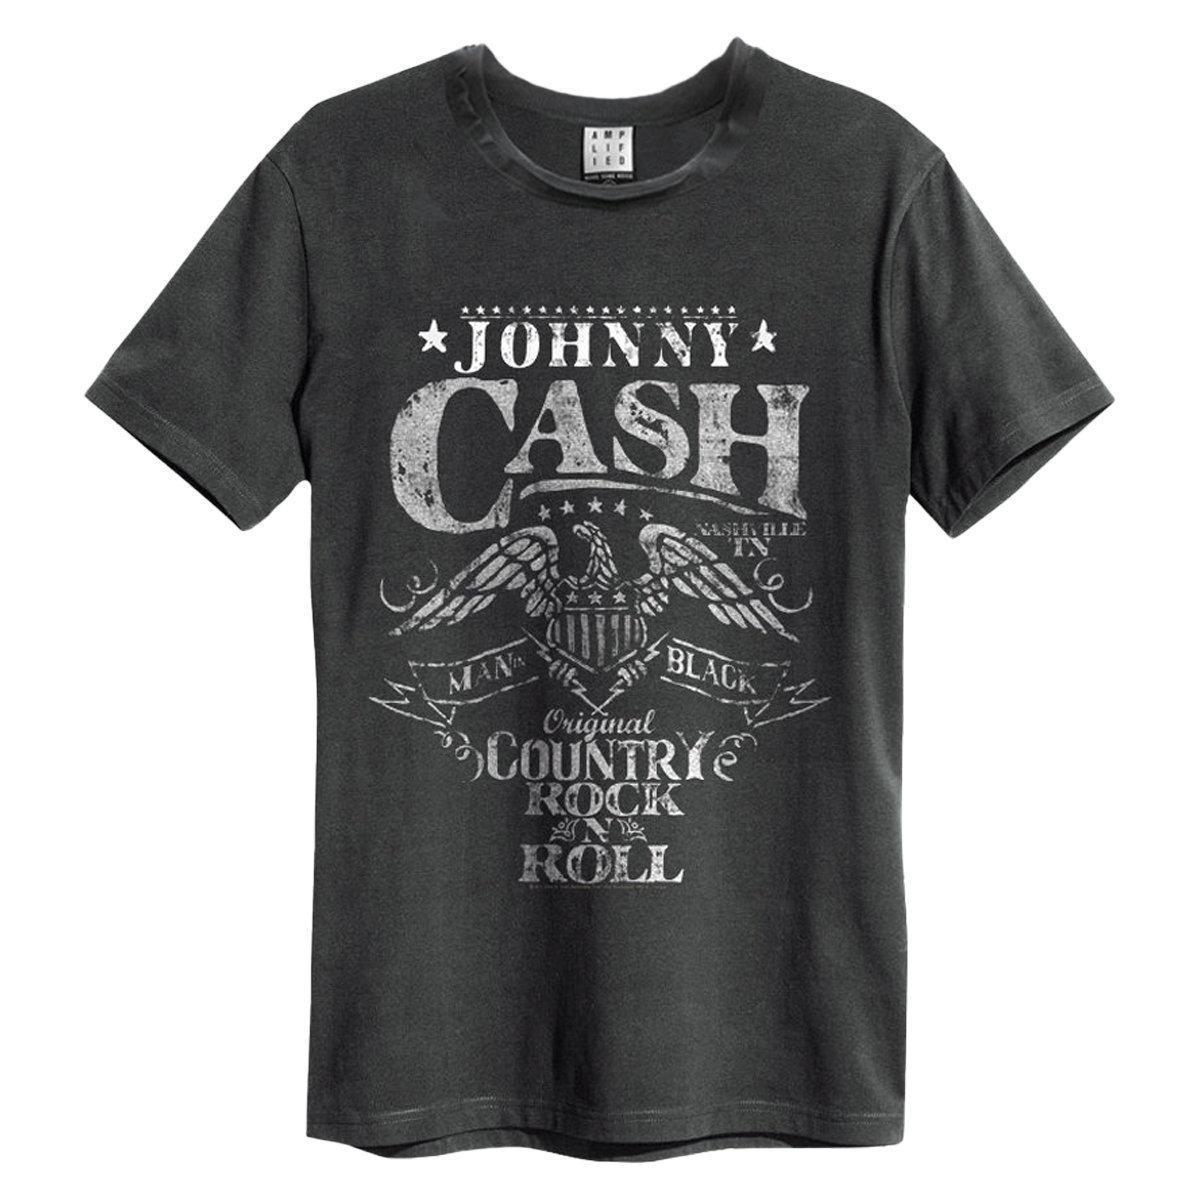 Amplified Unisex Adult Eagle Johnny Cash T-Shirt (Charcoal) (XXL)